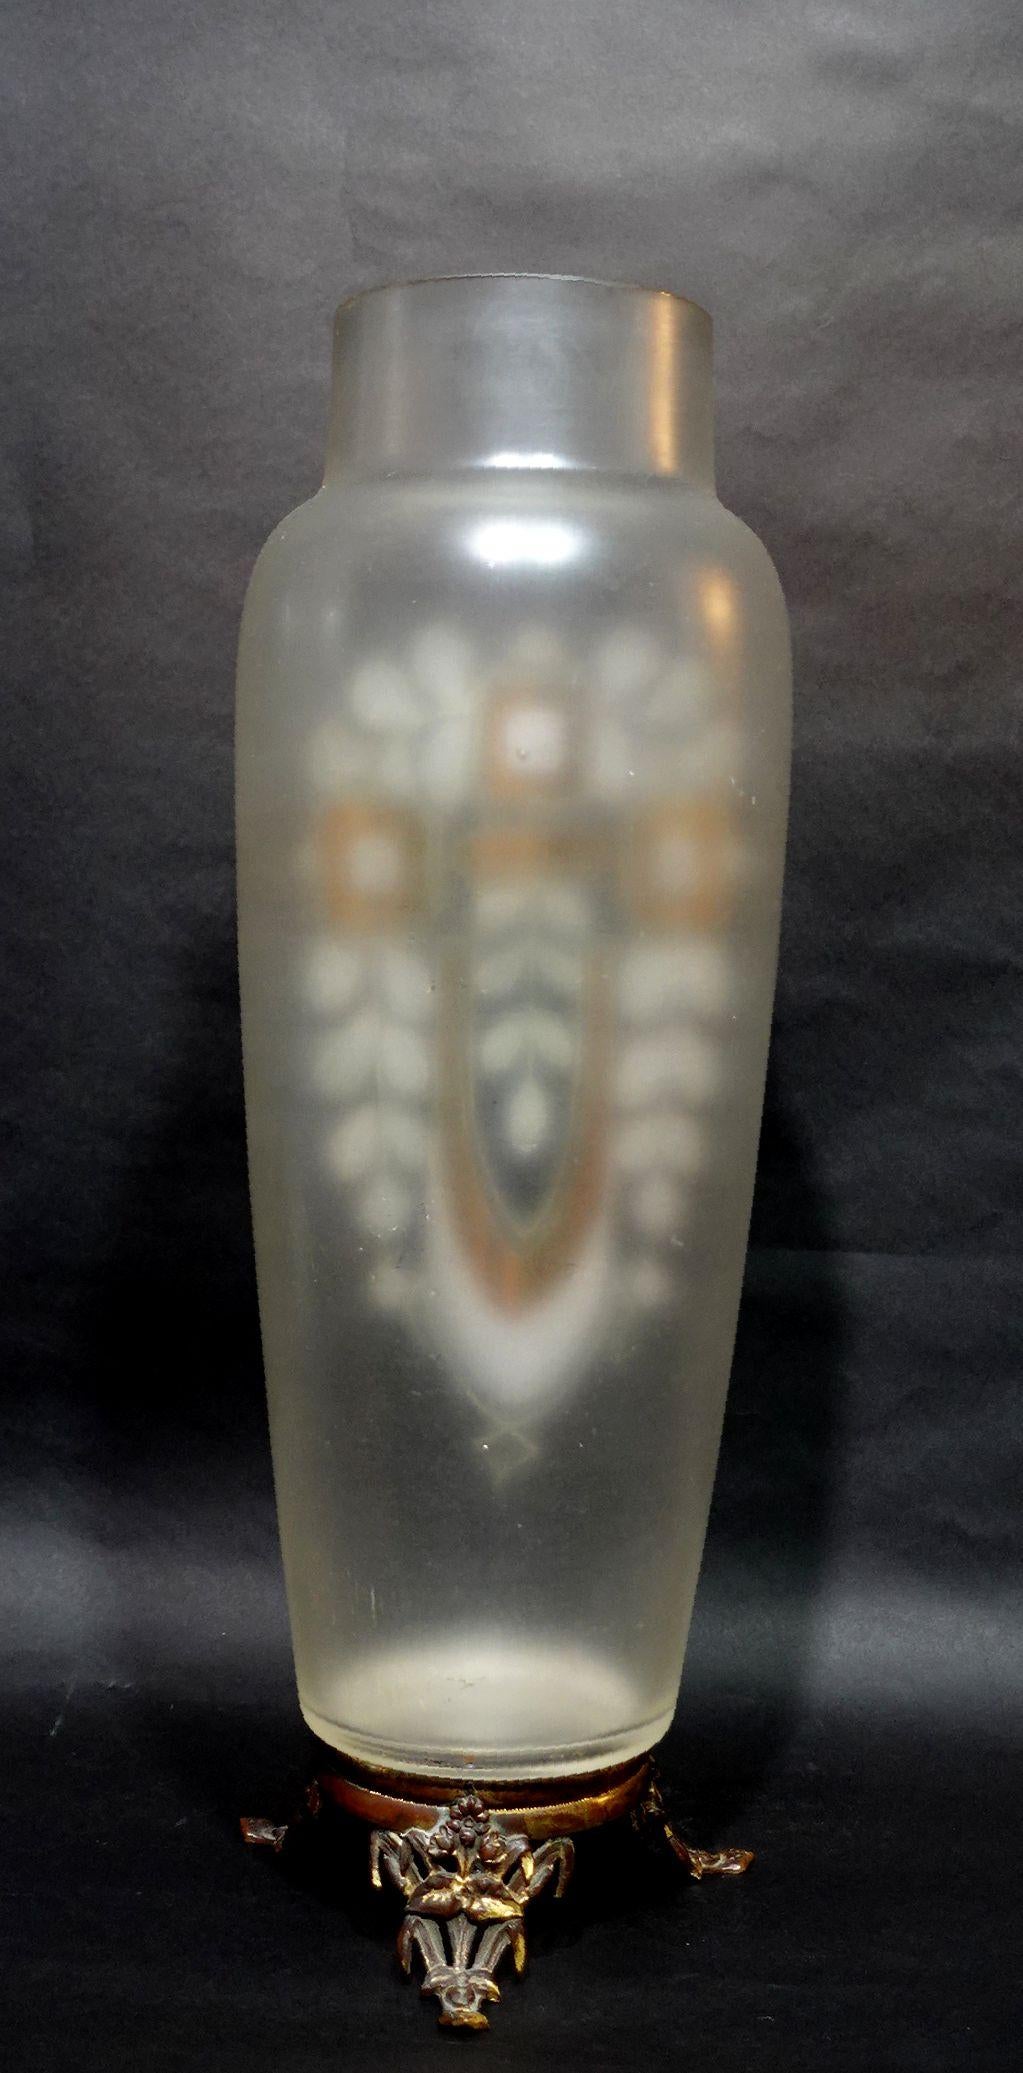 A Large Art Nouveau Enameled and Gilt Art Glass Vase In Good Condition For Sale In Norton, MA